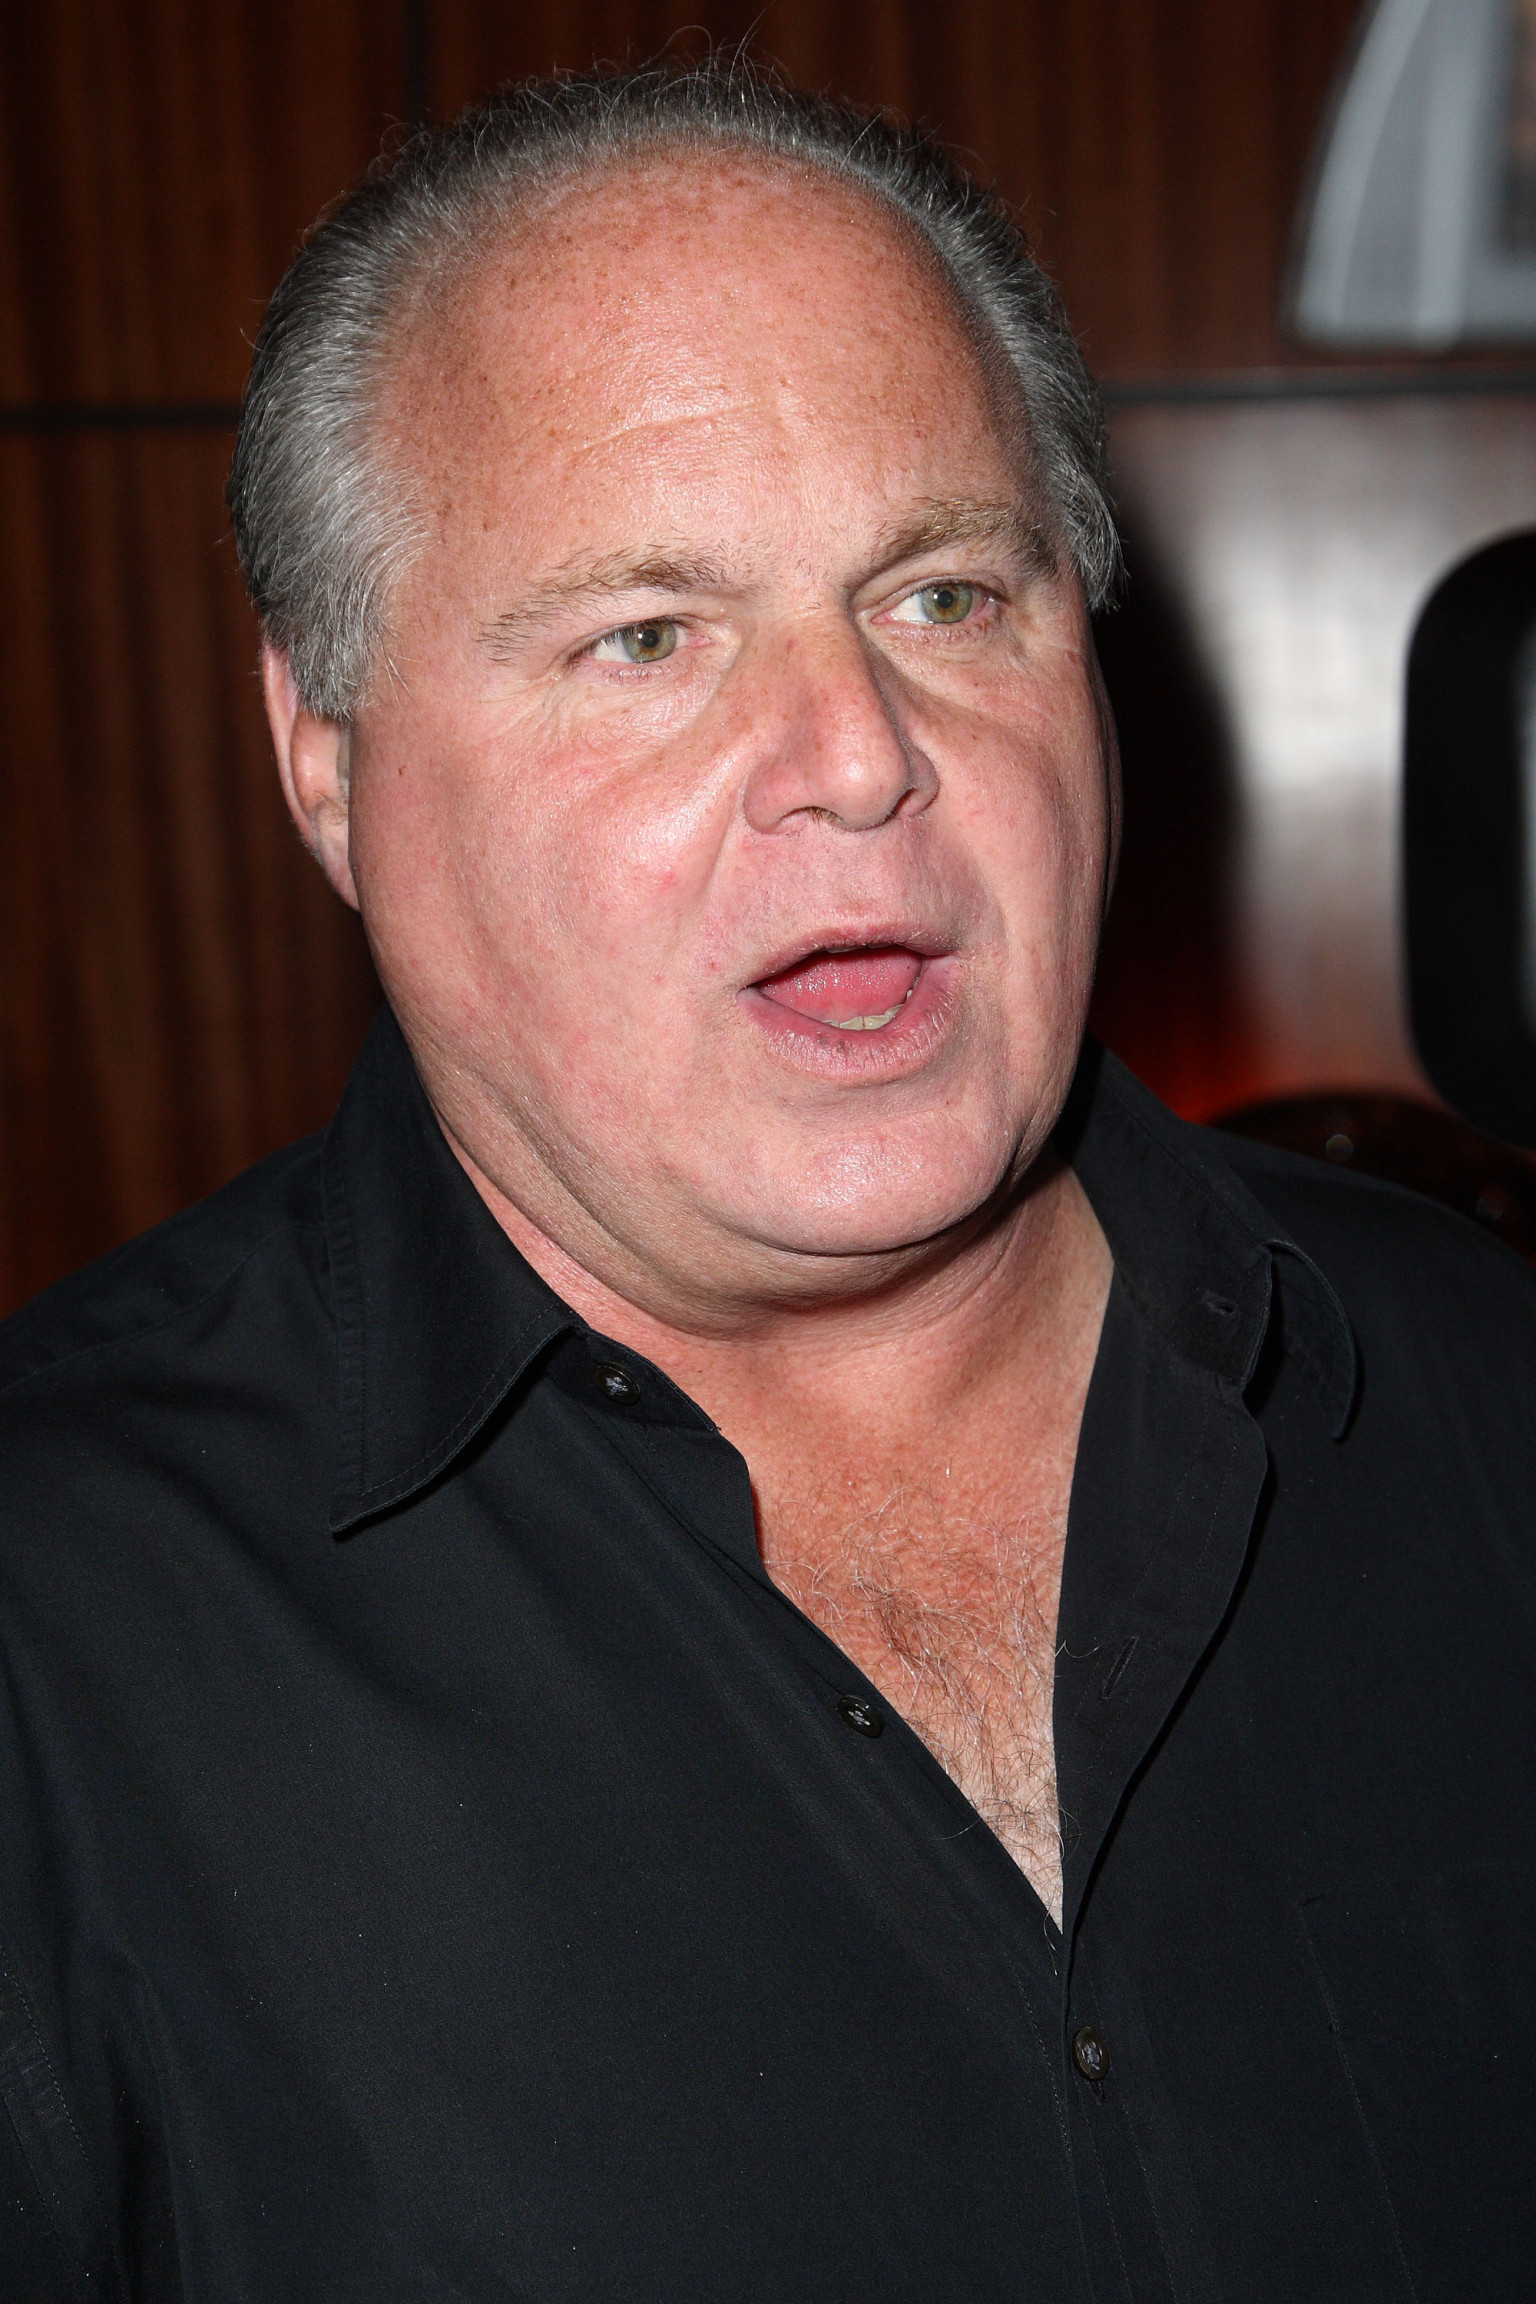 Rush Limbaugh On GOP: 'One Of The Greatest Political Disasters I've Ever Seen' | HuffPost1536 x 2304